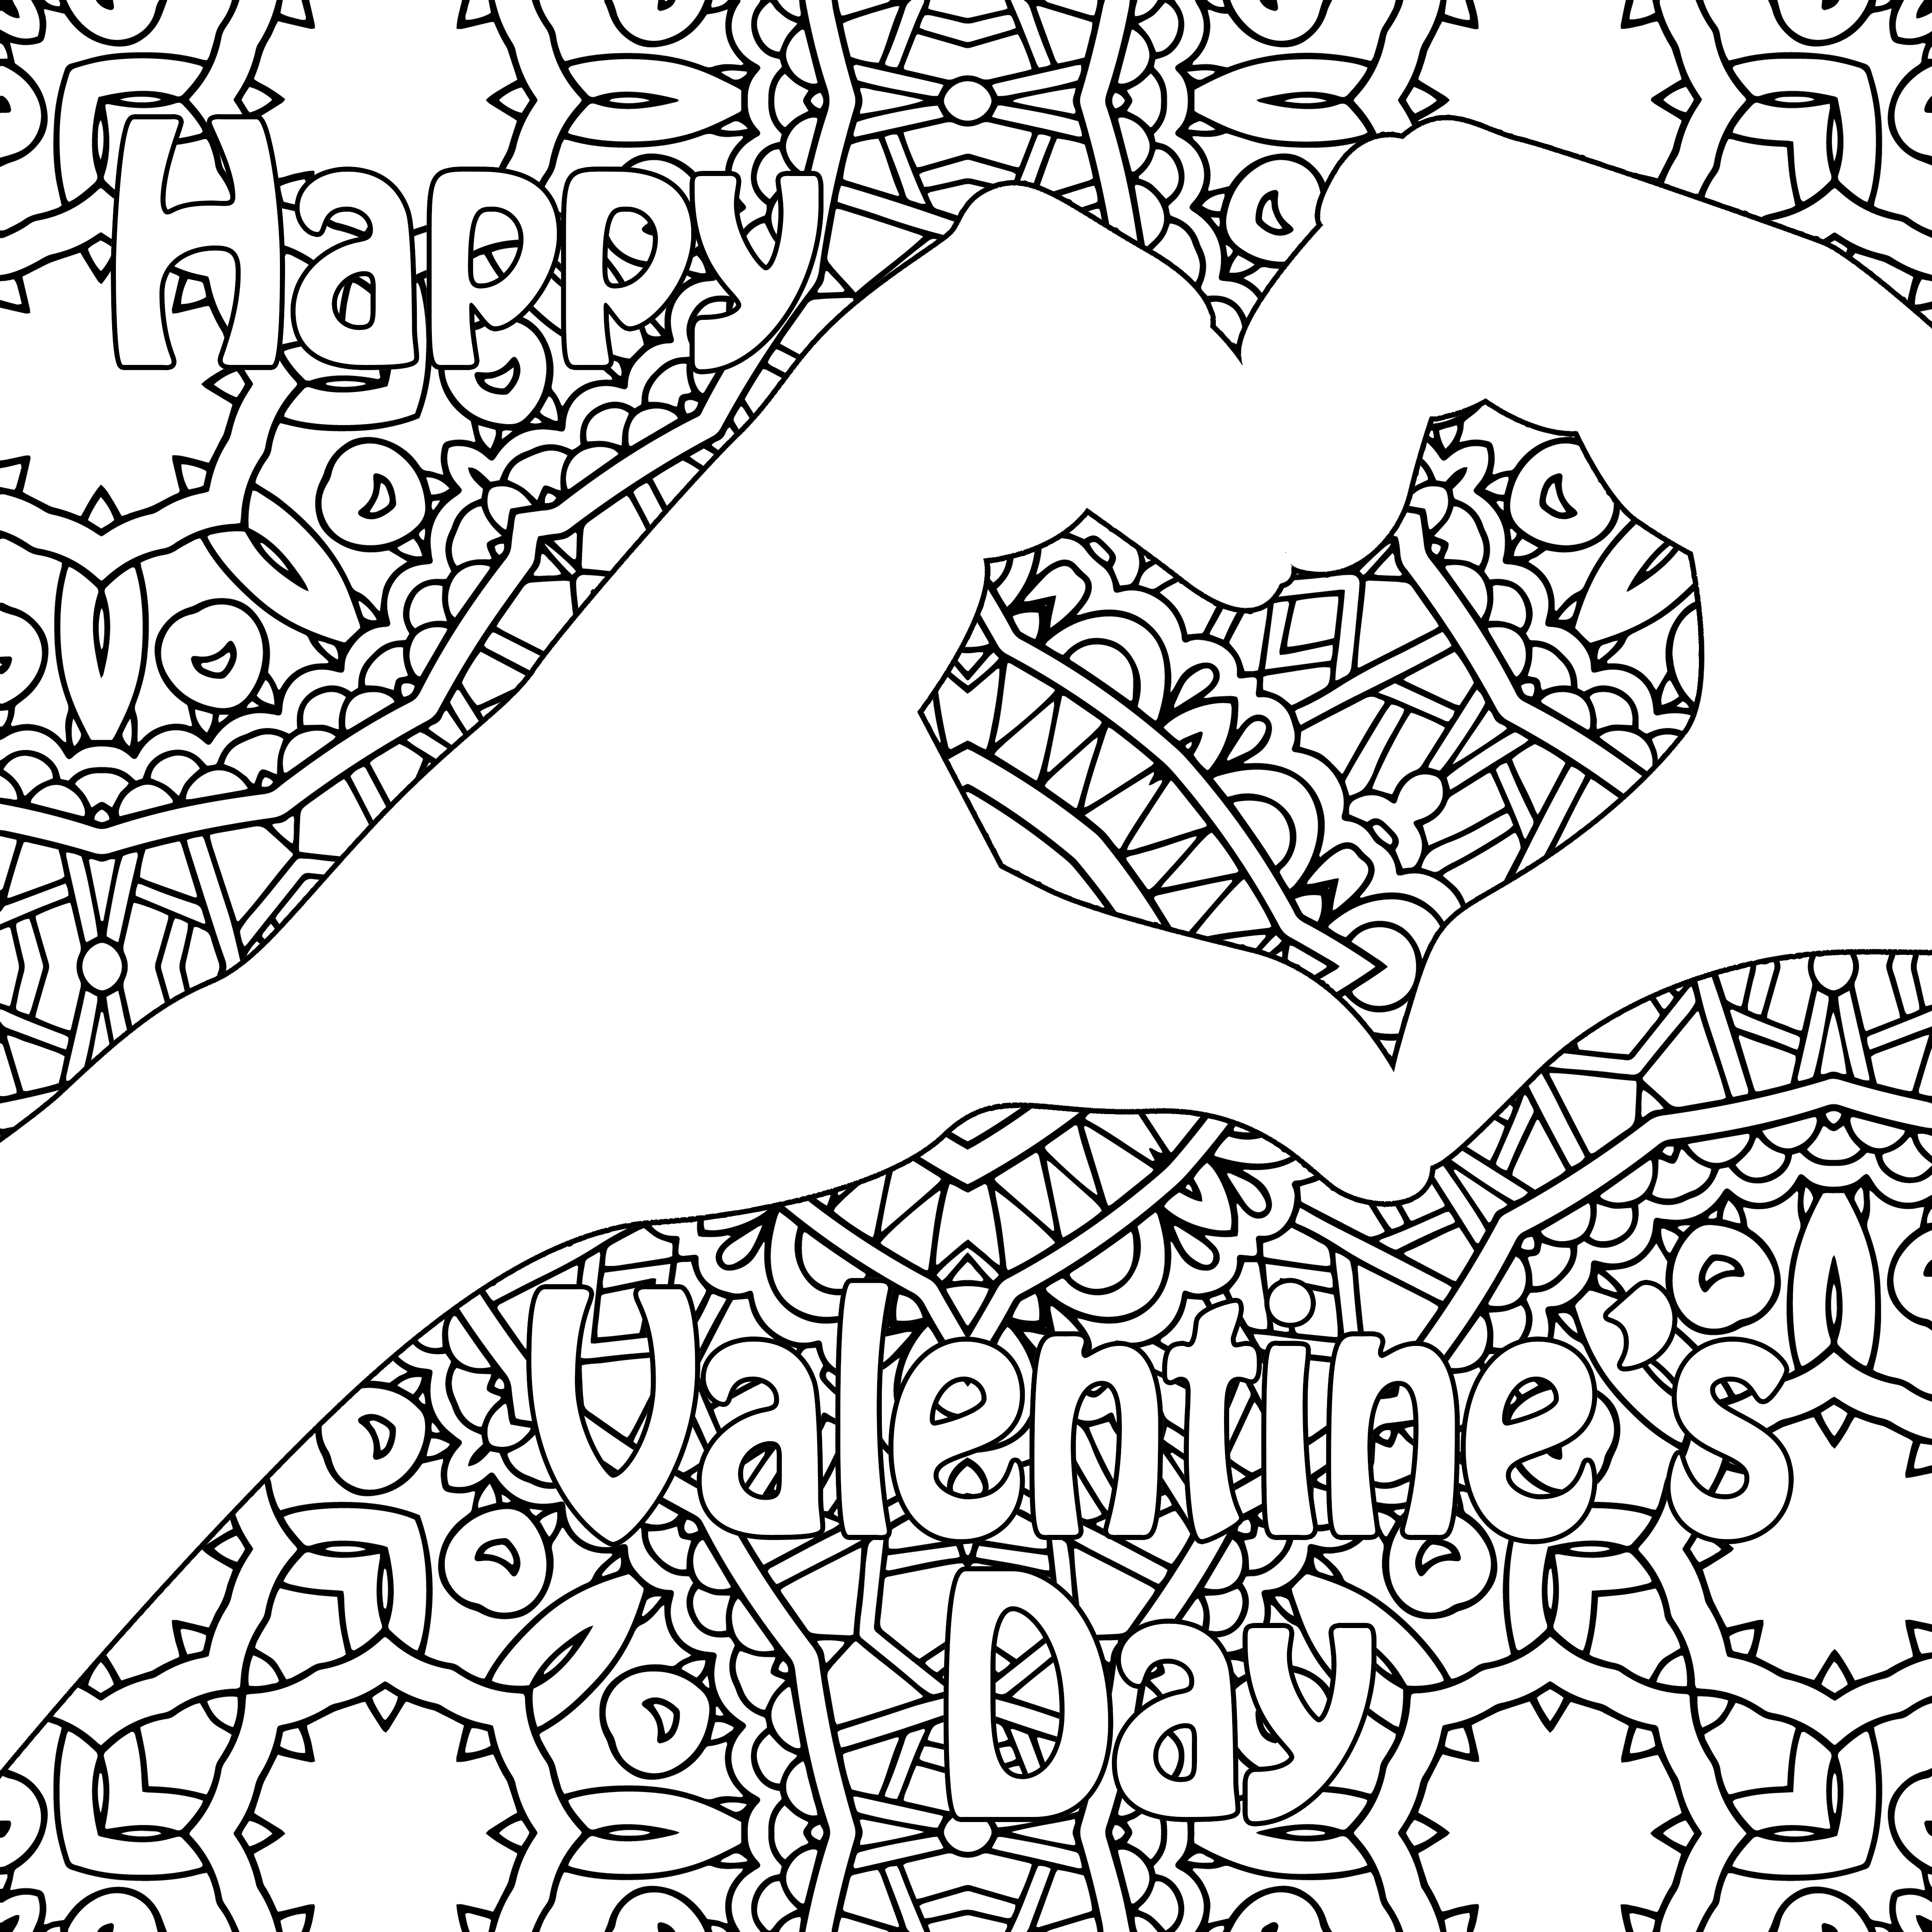 Heart in Hands Coloring Pack